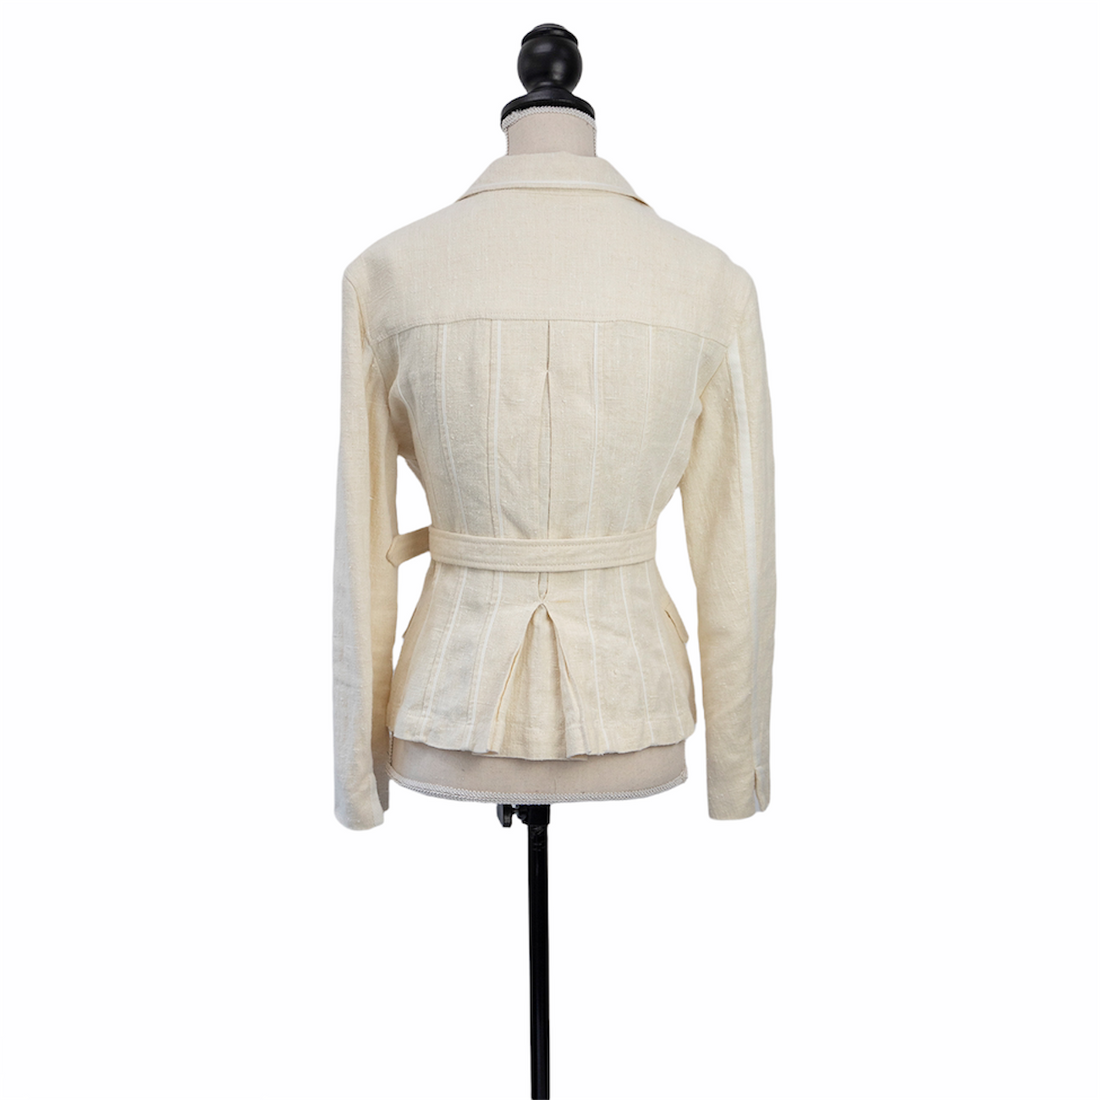 Strenesse linen jacket with belt and patch pockets